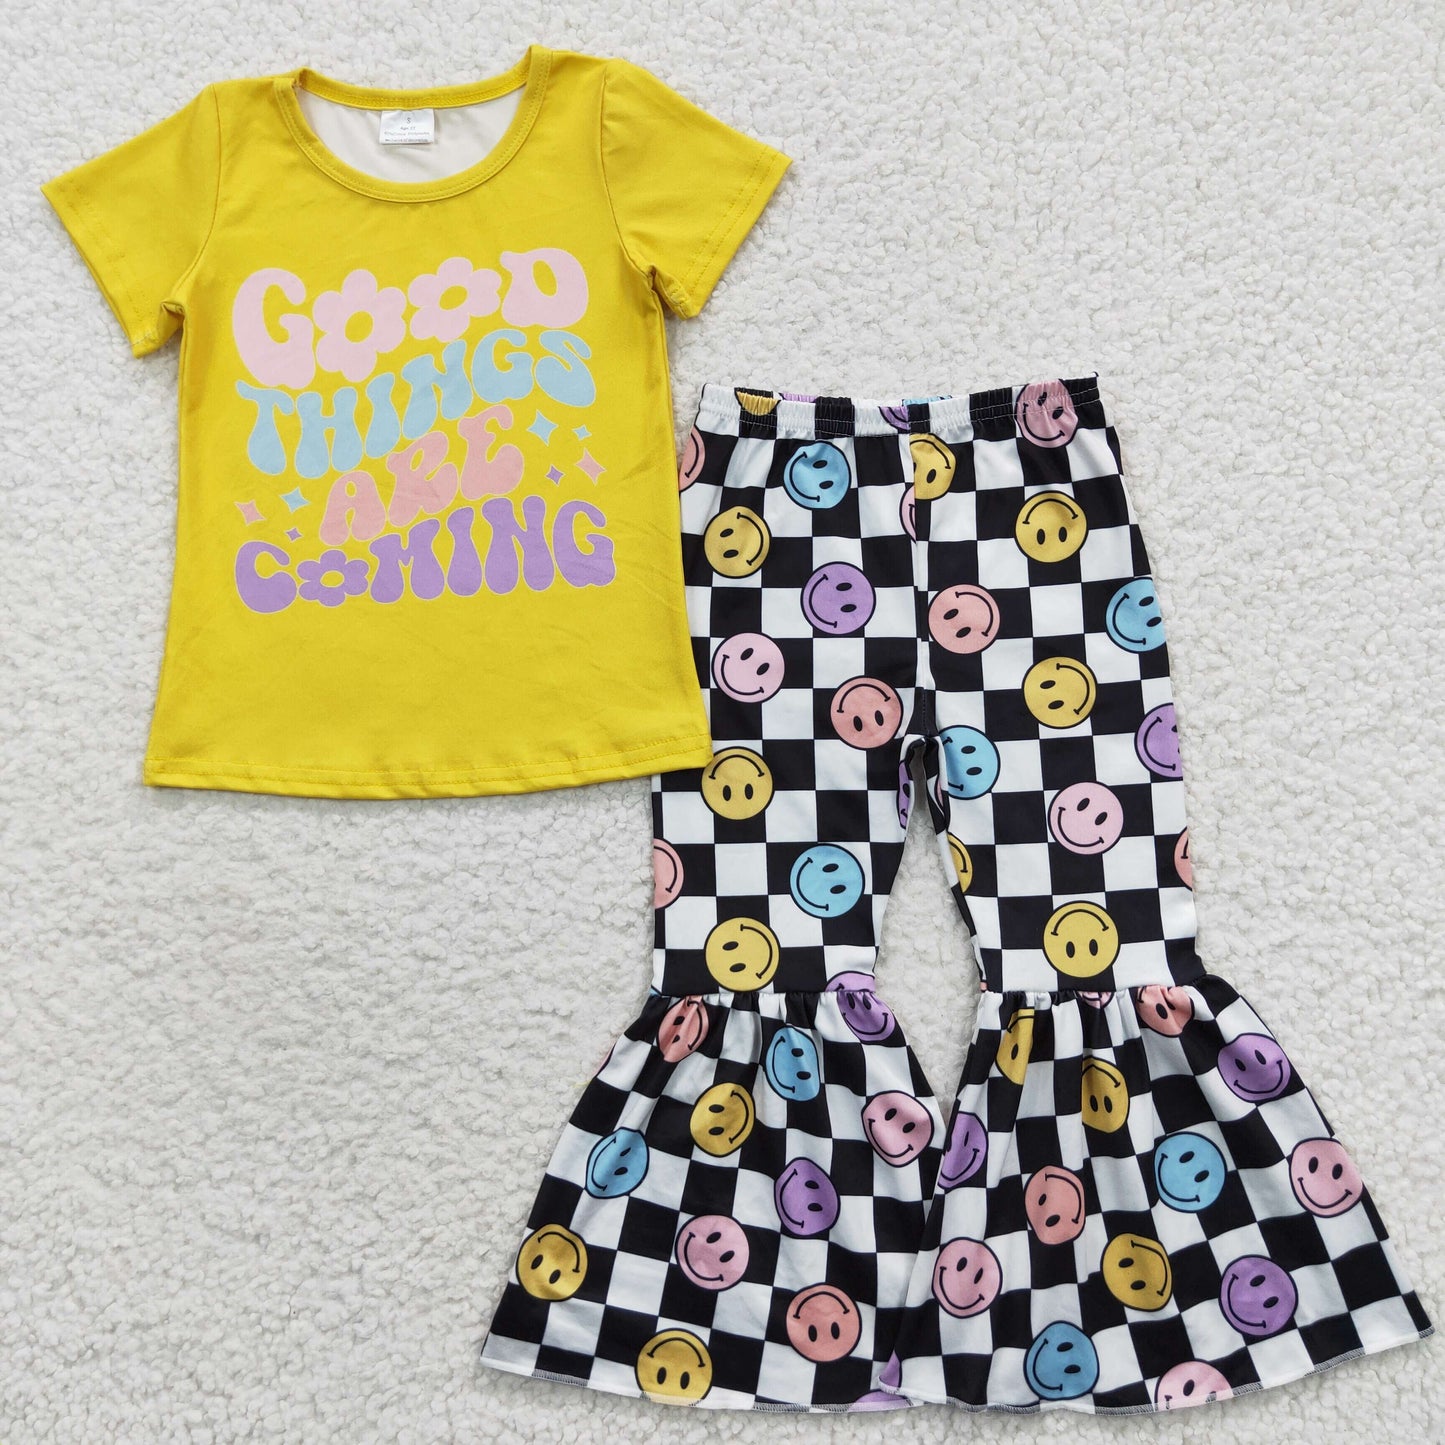 Good things are coming smile face outfit